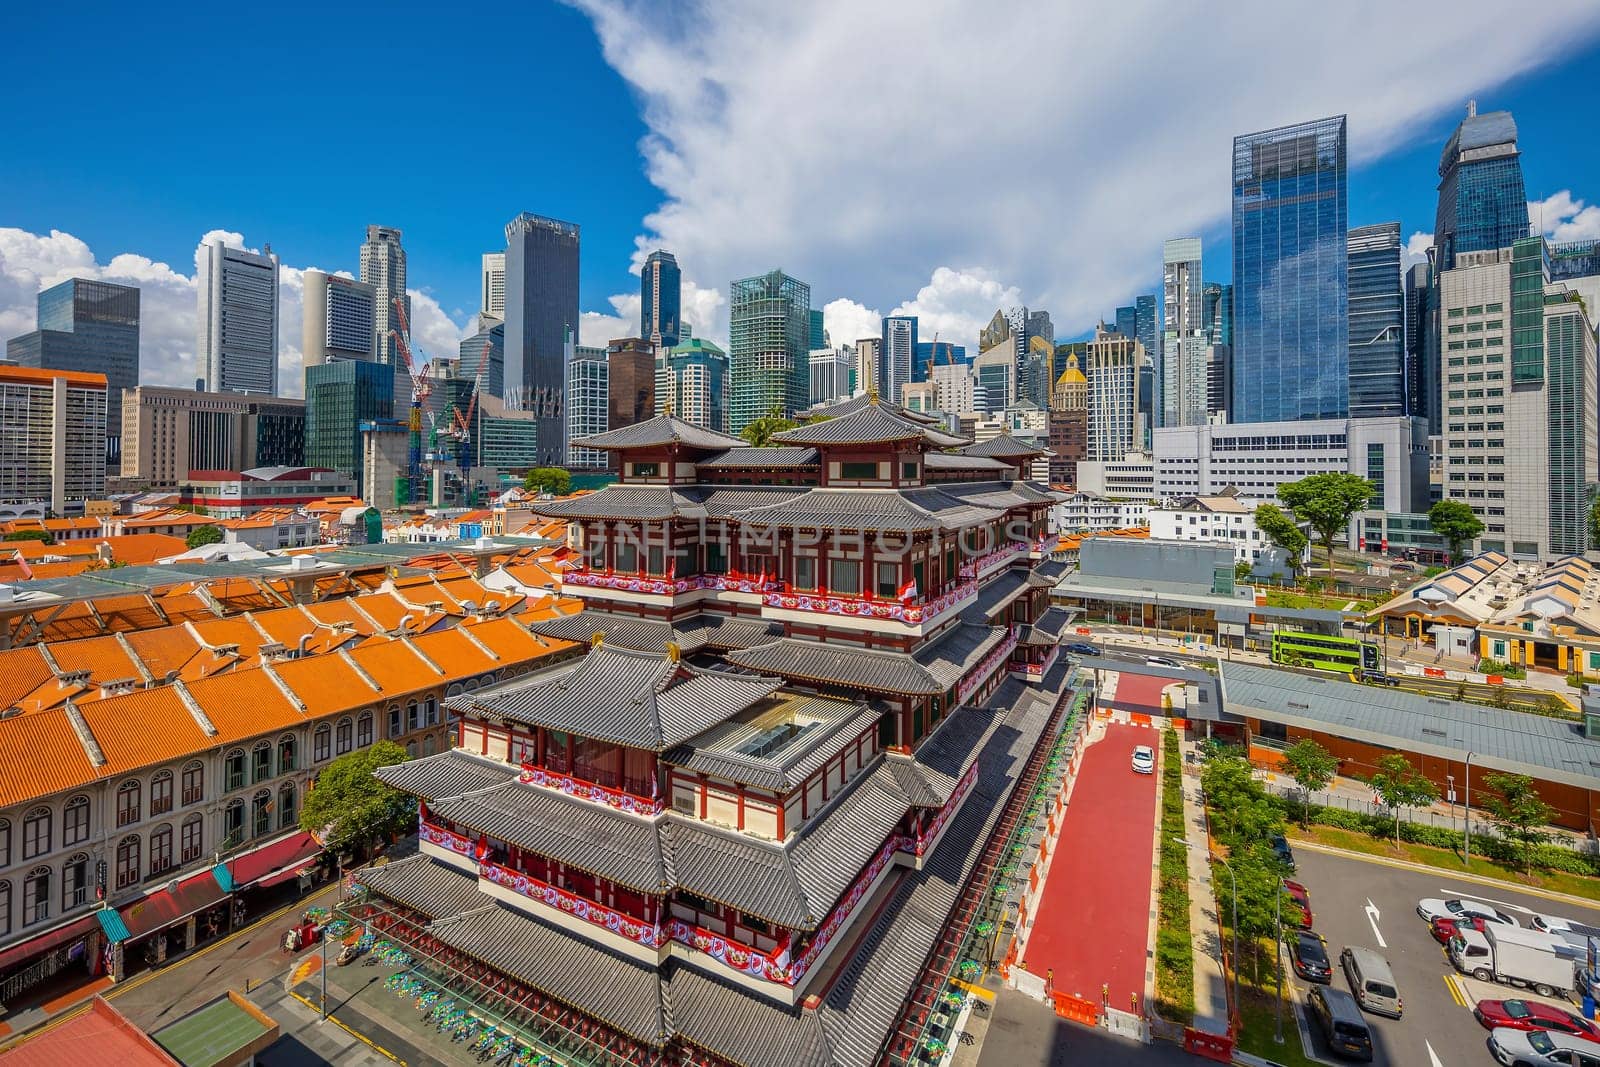 Buddha Toothe Relic Temple at Chinatown in Singapore